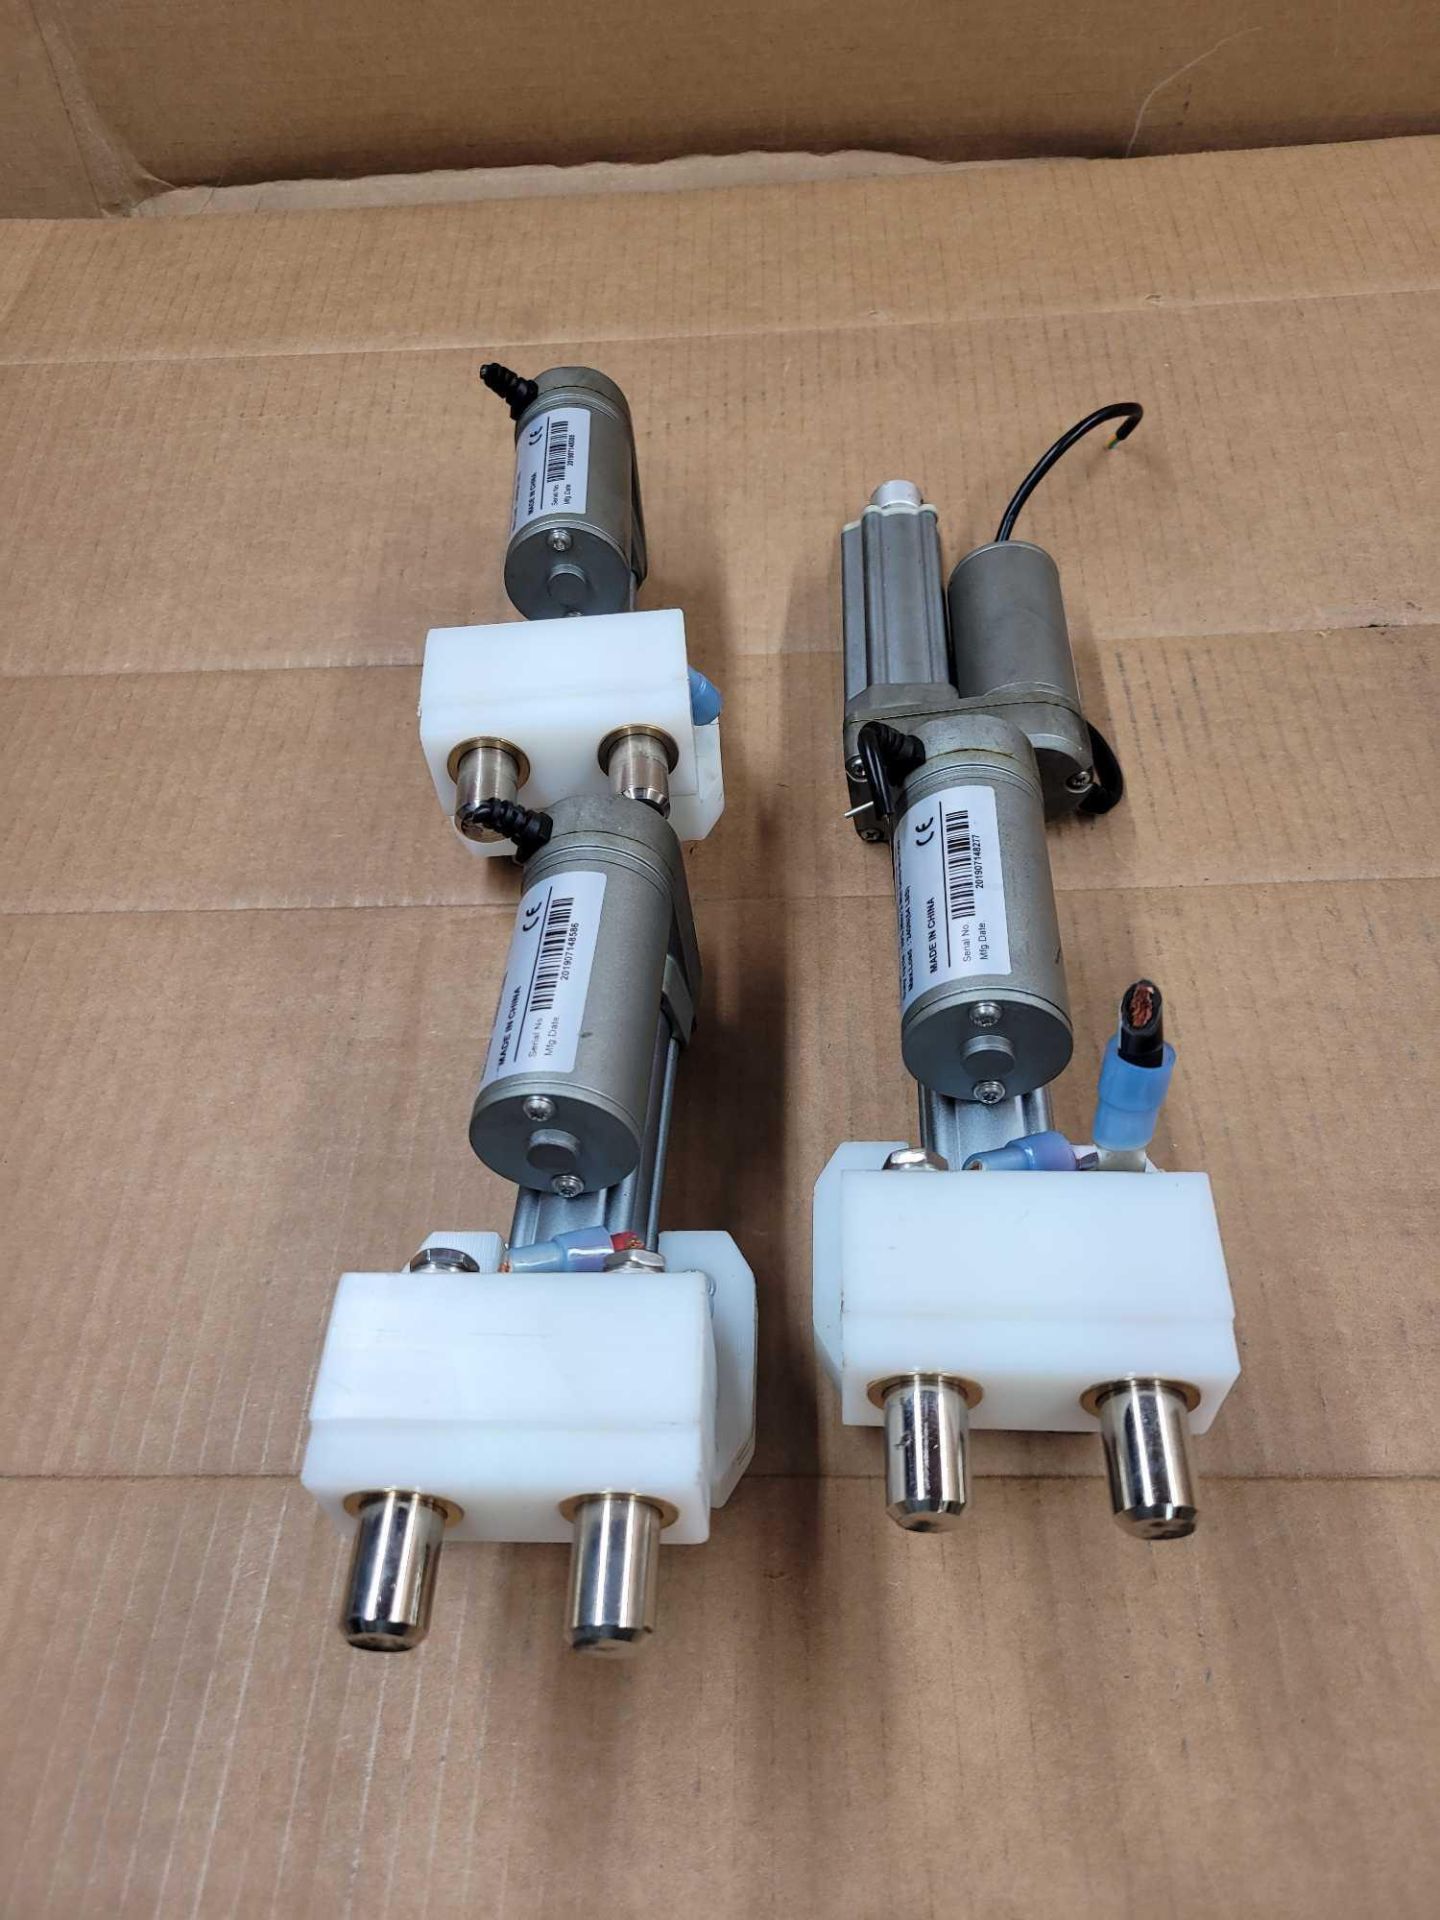 LOT OF 4 DUFF-NORTON LT50-2-50 / Linear Actuator  /  Lot Weight: 11.0 lbs